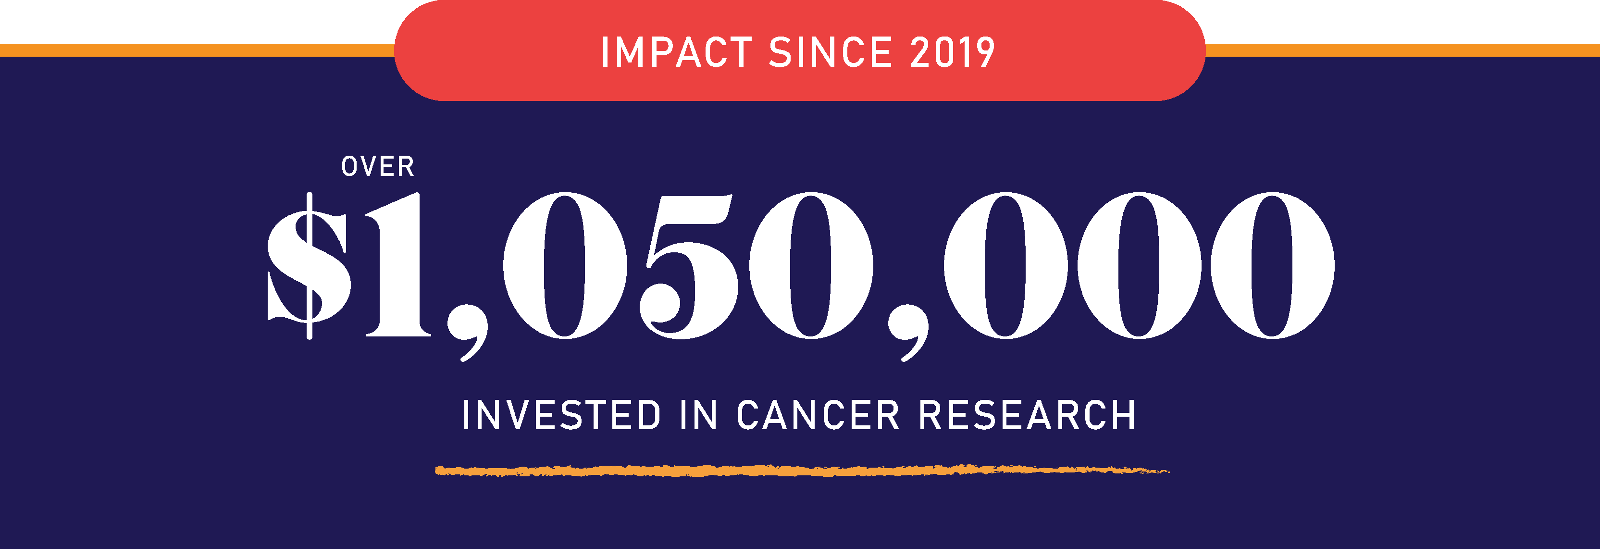 Impact since 2019: Over $1,050,000 invested in cancer research.